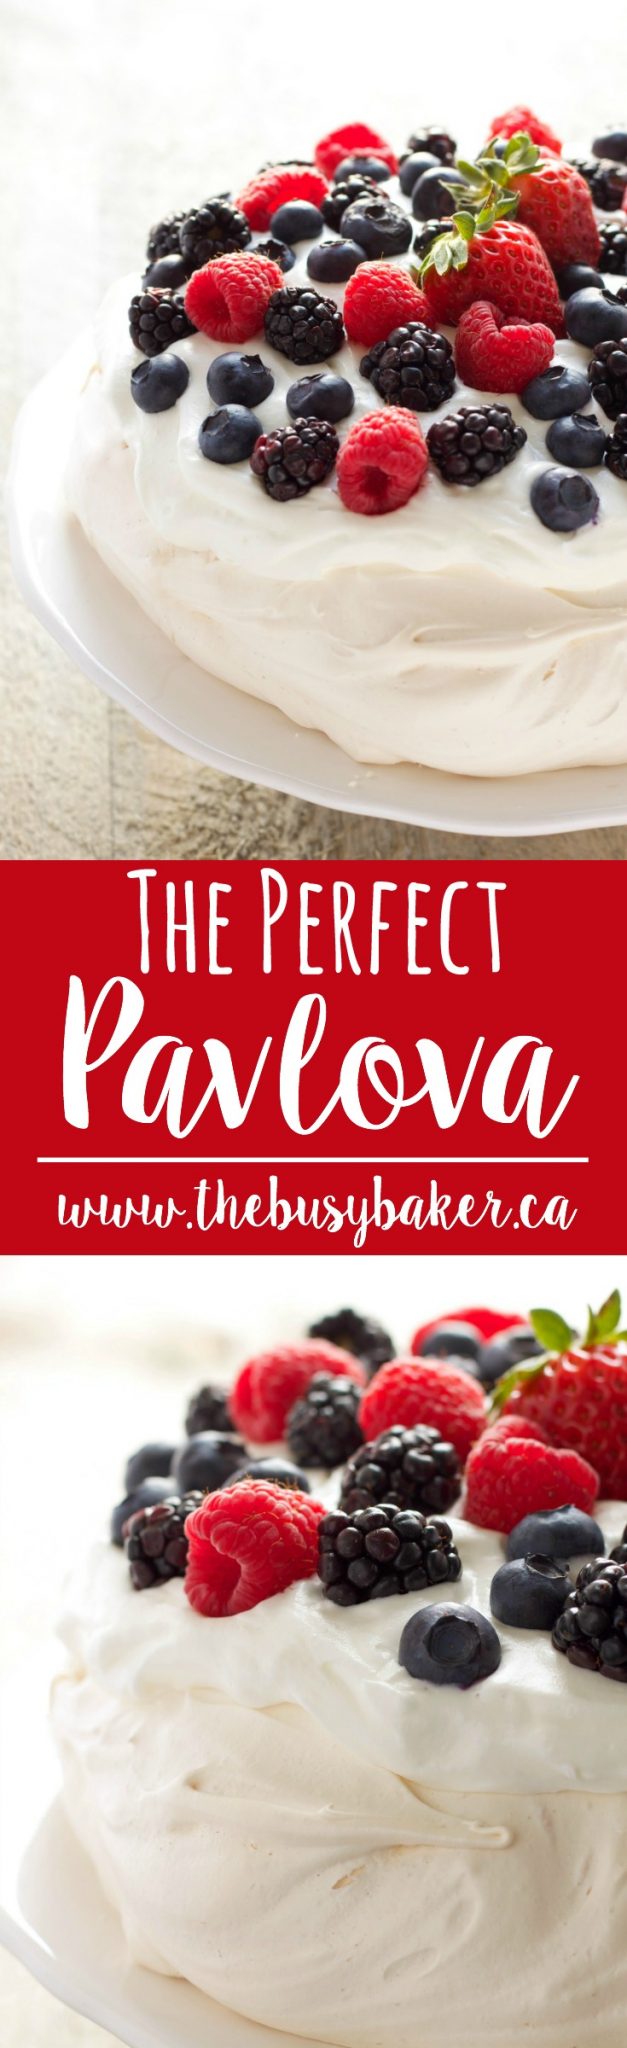 The Perfect Pavlova recipe makes a delicious and showstopping easy-to-make gluten-free dessert that's also on the healthier side! Recipe from thebusybaker.ca! via @busybakerblog